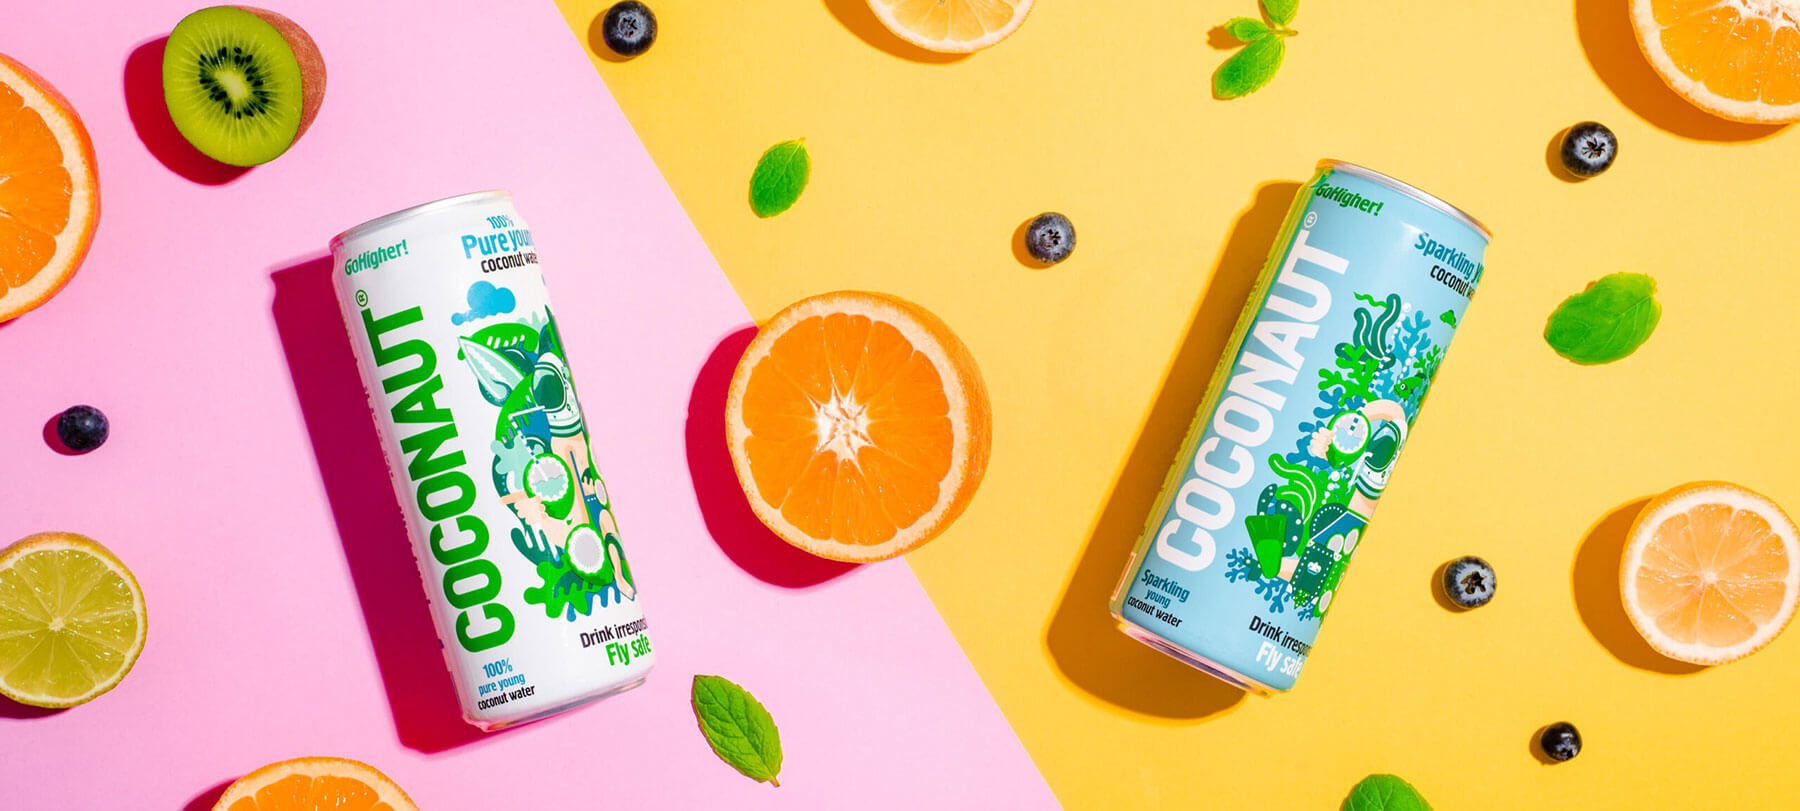 Coconaut - Coconut | Young Water Pure FodaBox